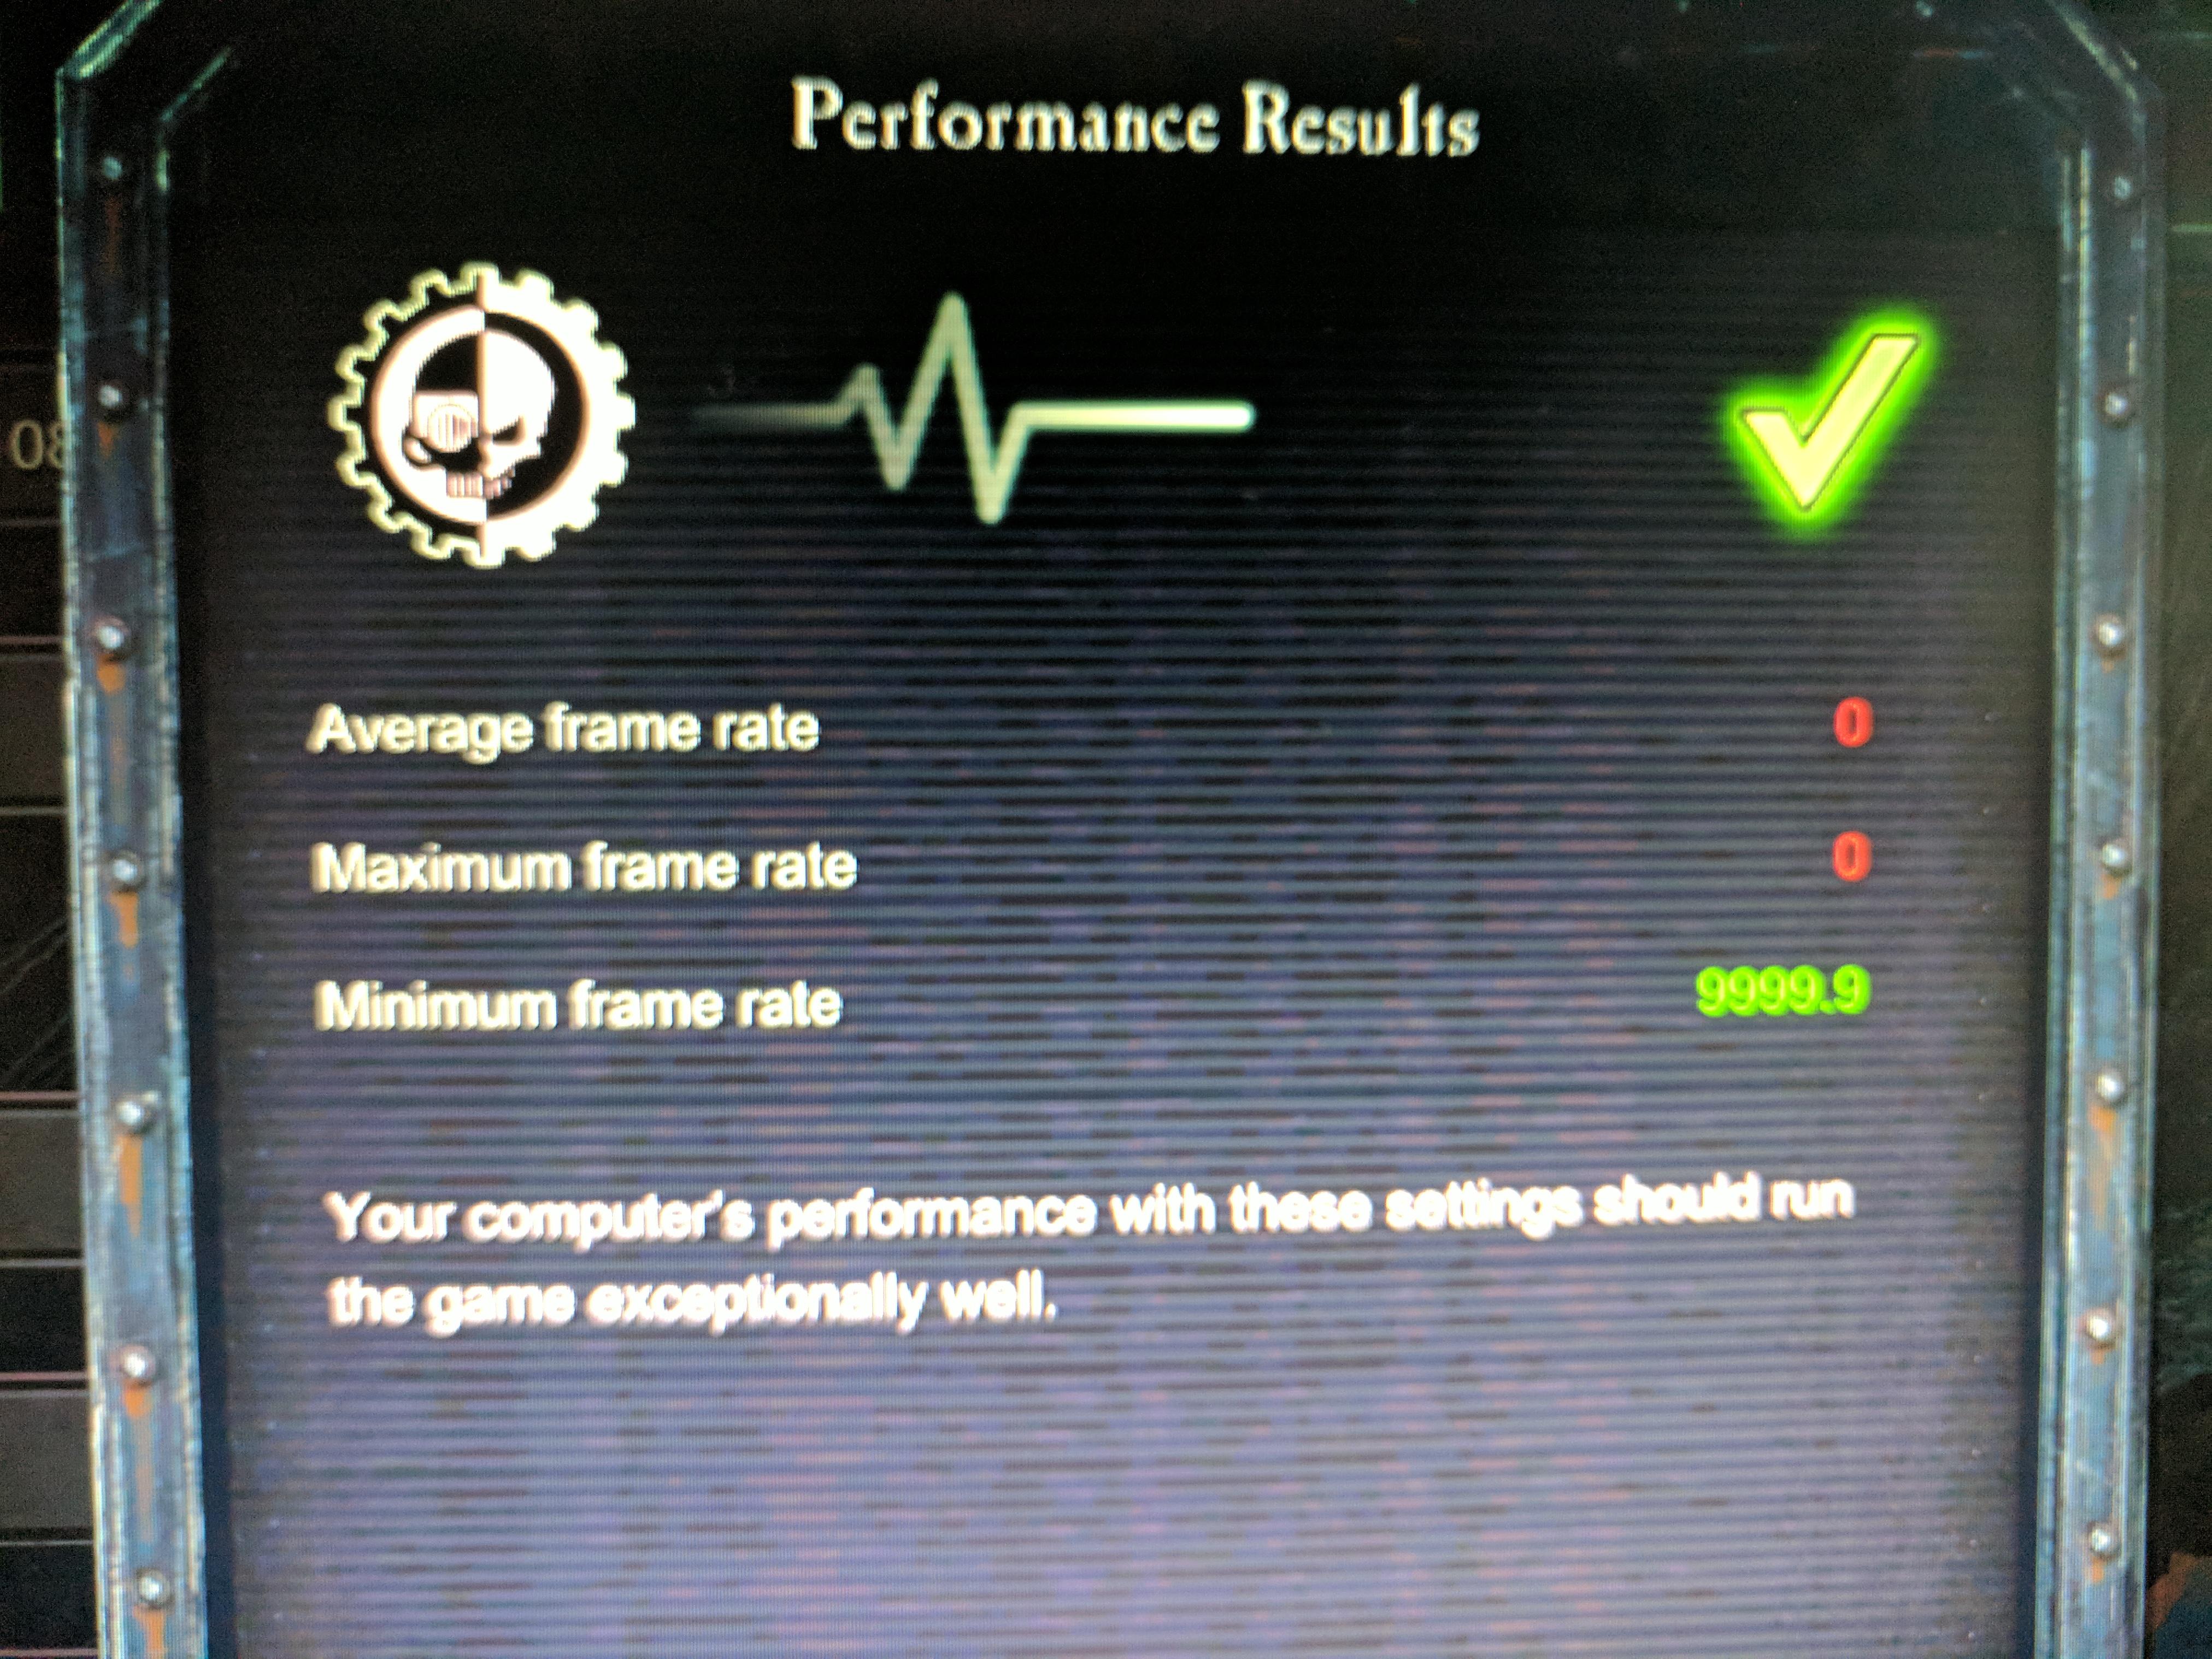 display device - Performance Results Average frame rate Maximum frame rate Minimum frame rate 9999.9 Your computer's performance with these setings should run the game exceptionally well.